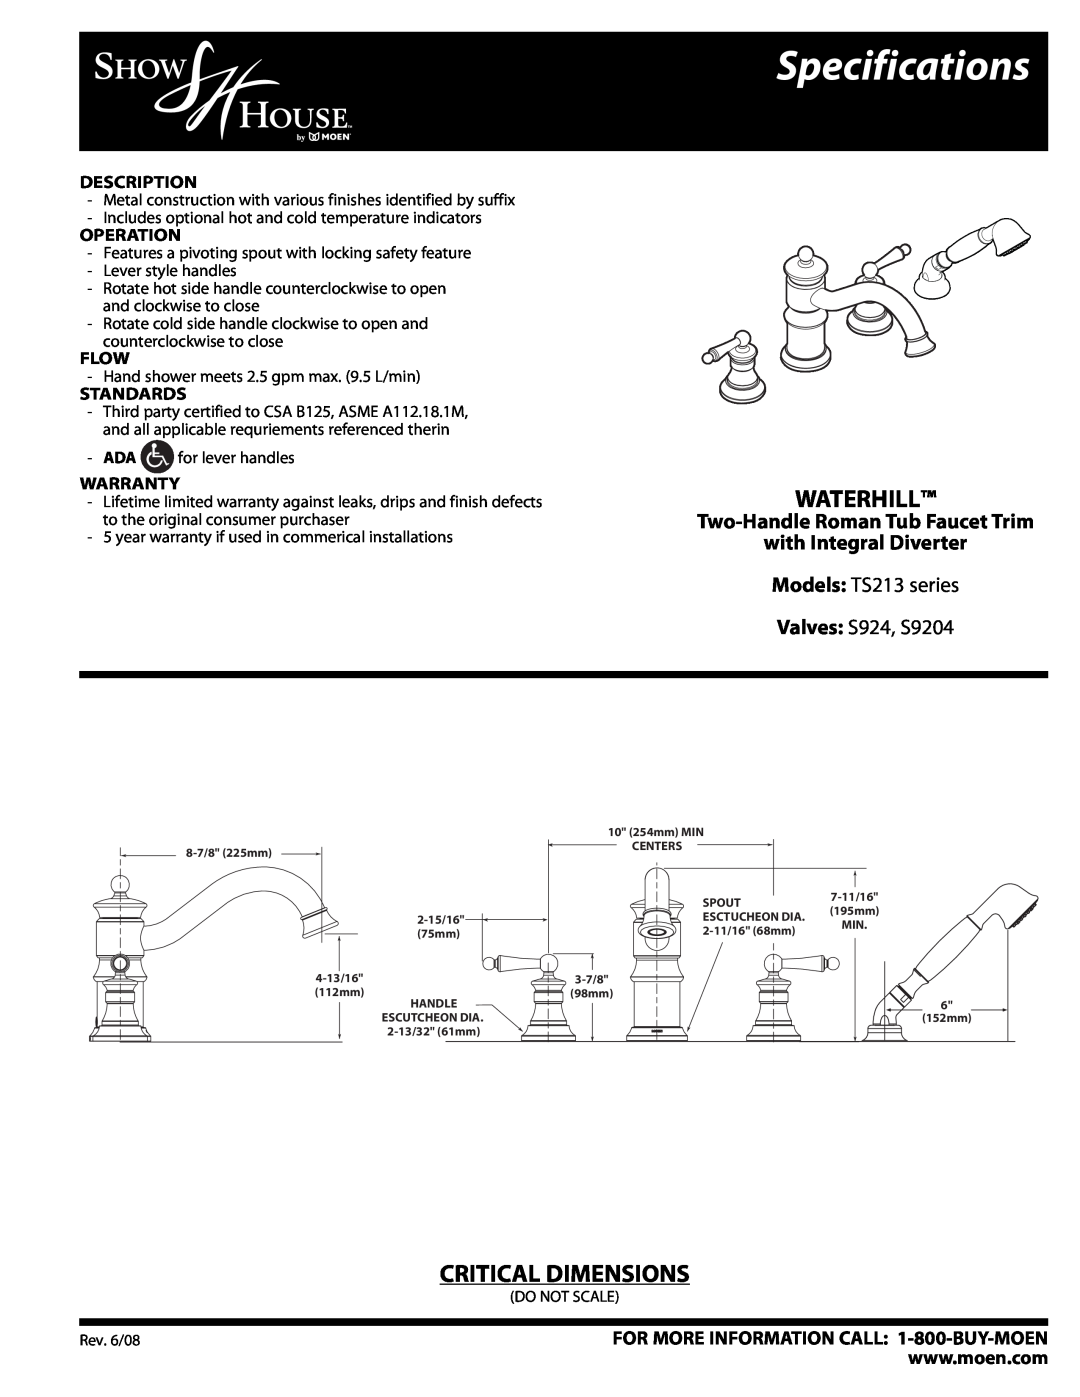 Moen specifications Specifications, Waterhill, Critical Dimensions, Models TS213 series Valves S924, S9204, Description 